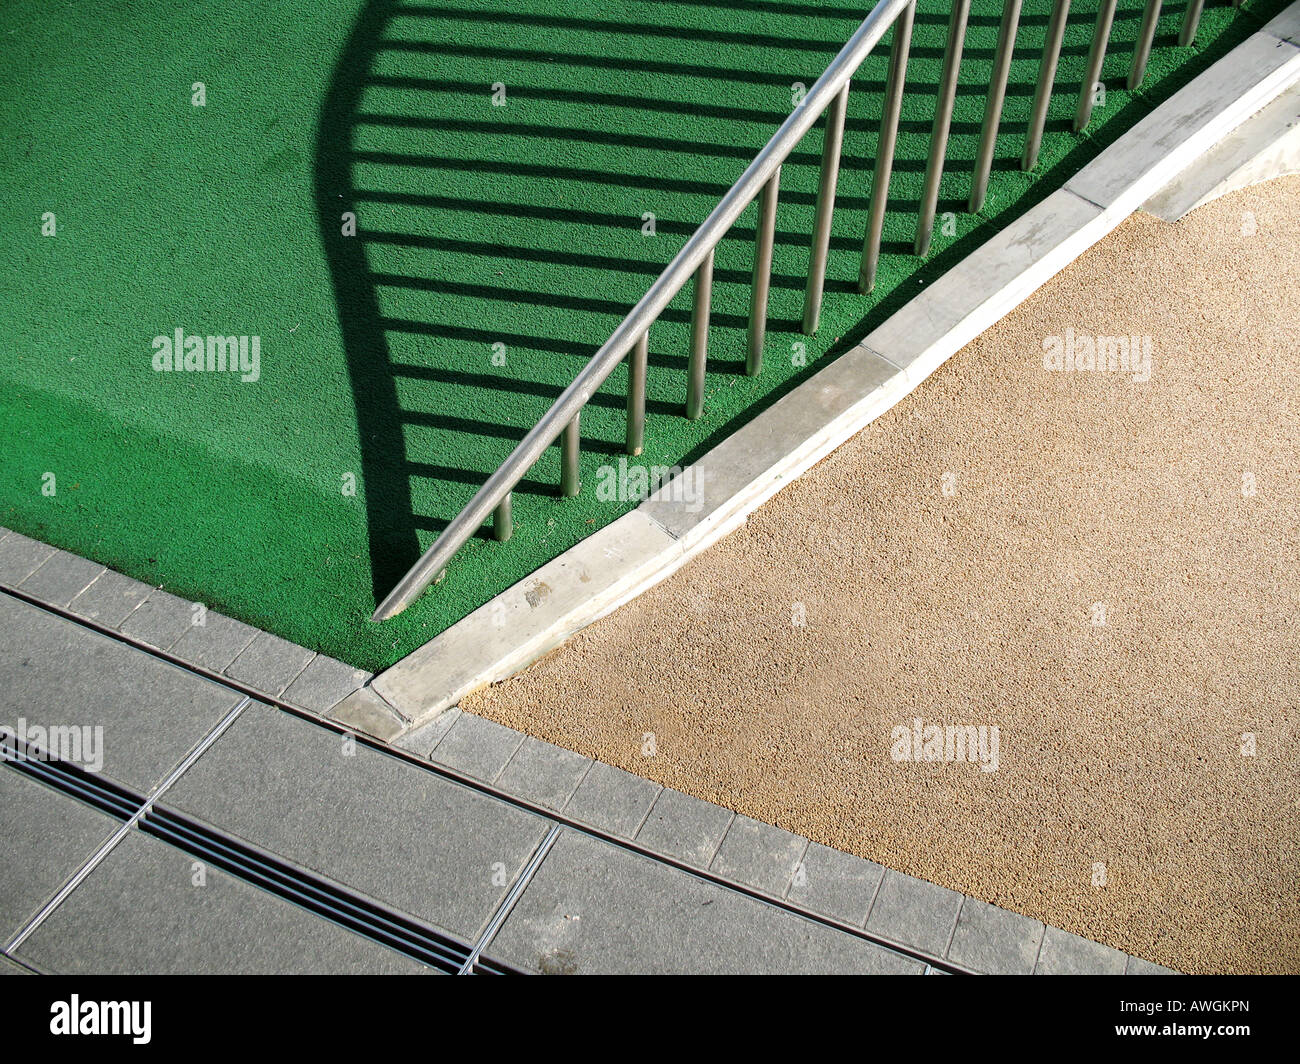 A part of floor pattern from public playground at vivo city, Singapore and juxtapose it with the shadow of metal hand railing Stock Photo